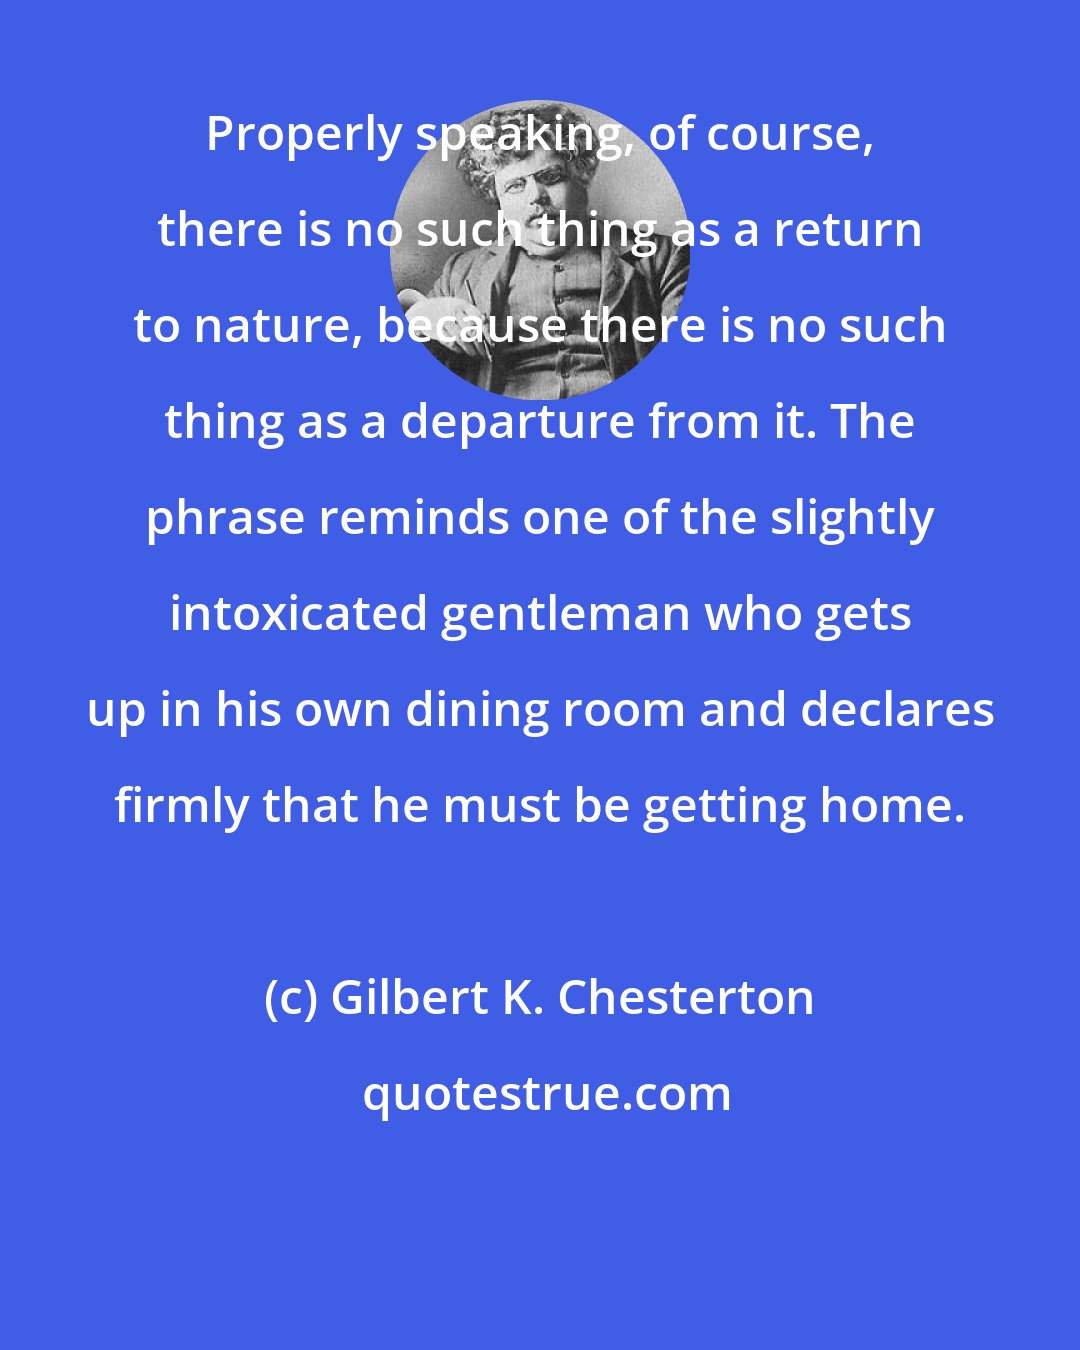 Gilbert K. Chesterton: Properly speaking, of course, there is no such thing as a return to nature, because there is no such thing as a departure from it. The phrase reminds one of the slightly intoxicated gentleman who gets up in his own dining room and declares firmly that he must be getting home.